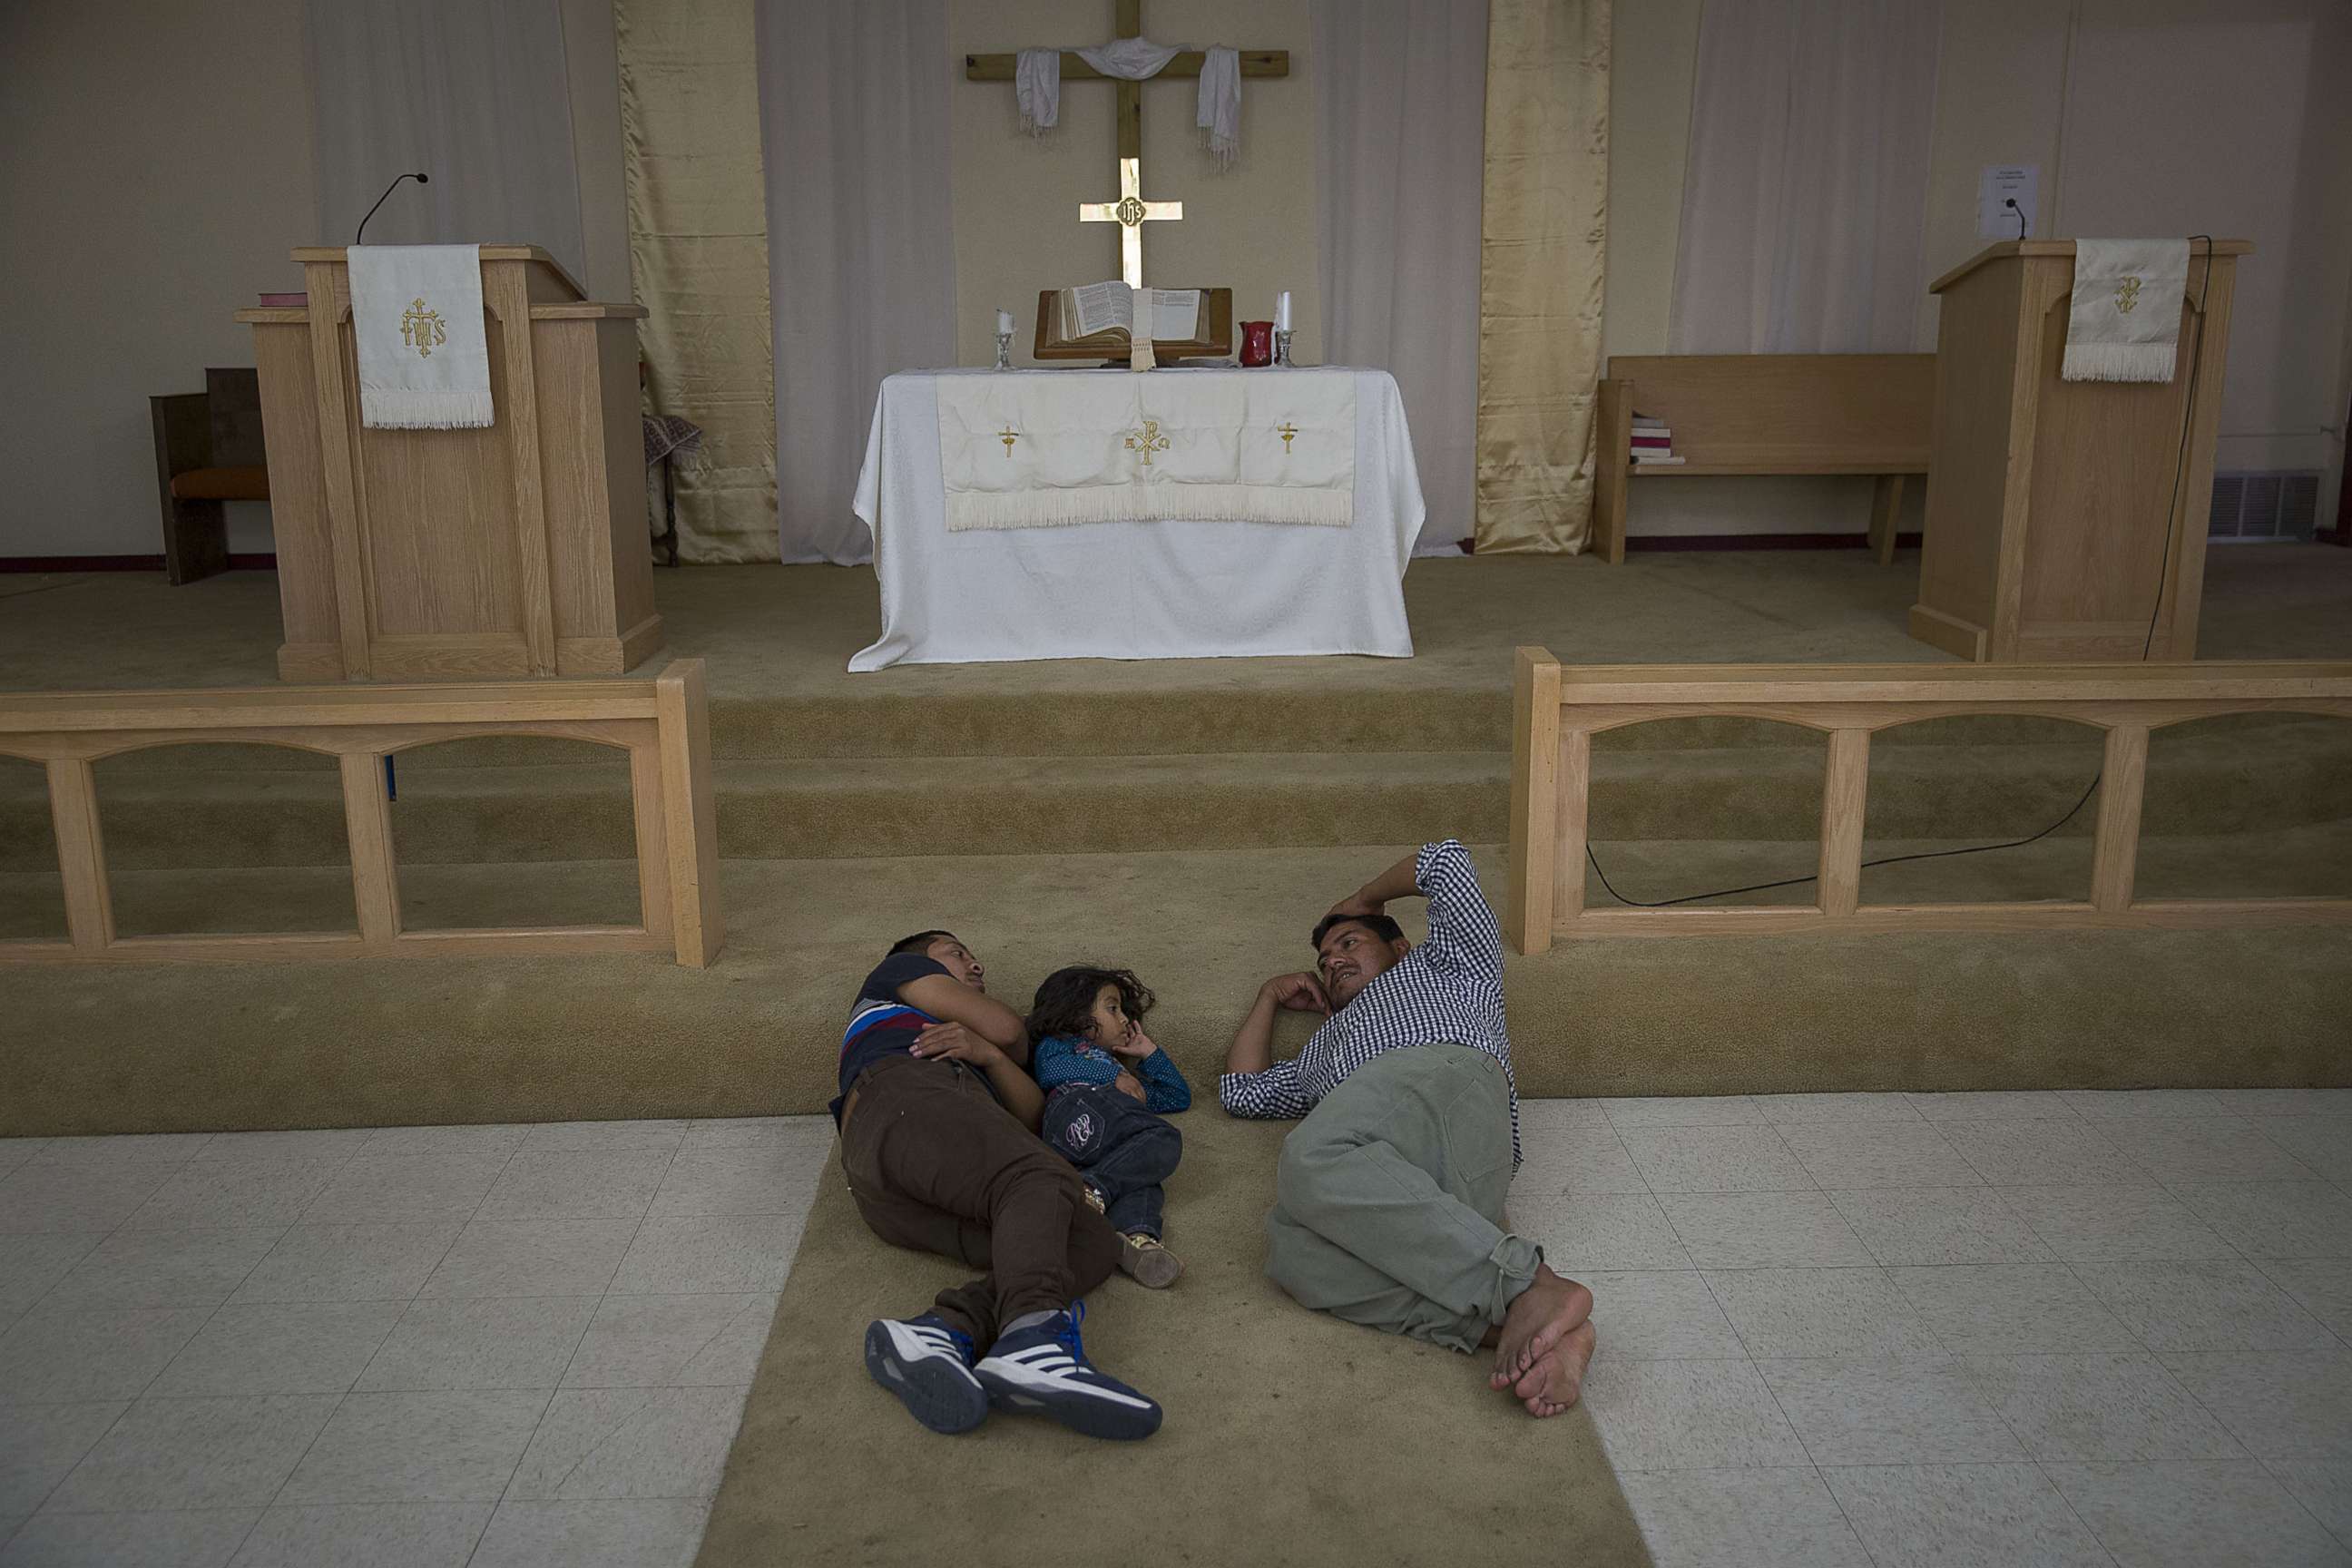 PHOTO: Migrants from Guatemala rest near the altar at the El Calvario Methodist Church which is housing migrants who are seeking asylum after being released by the U.S. Immigration and Customs Enforcement, June 3, 2019, in Las Cruces, New Mexico.